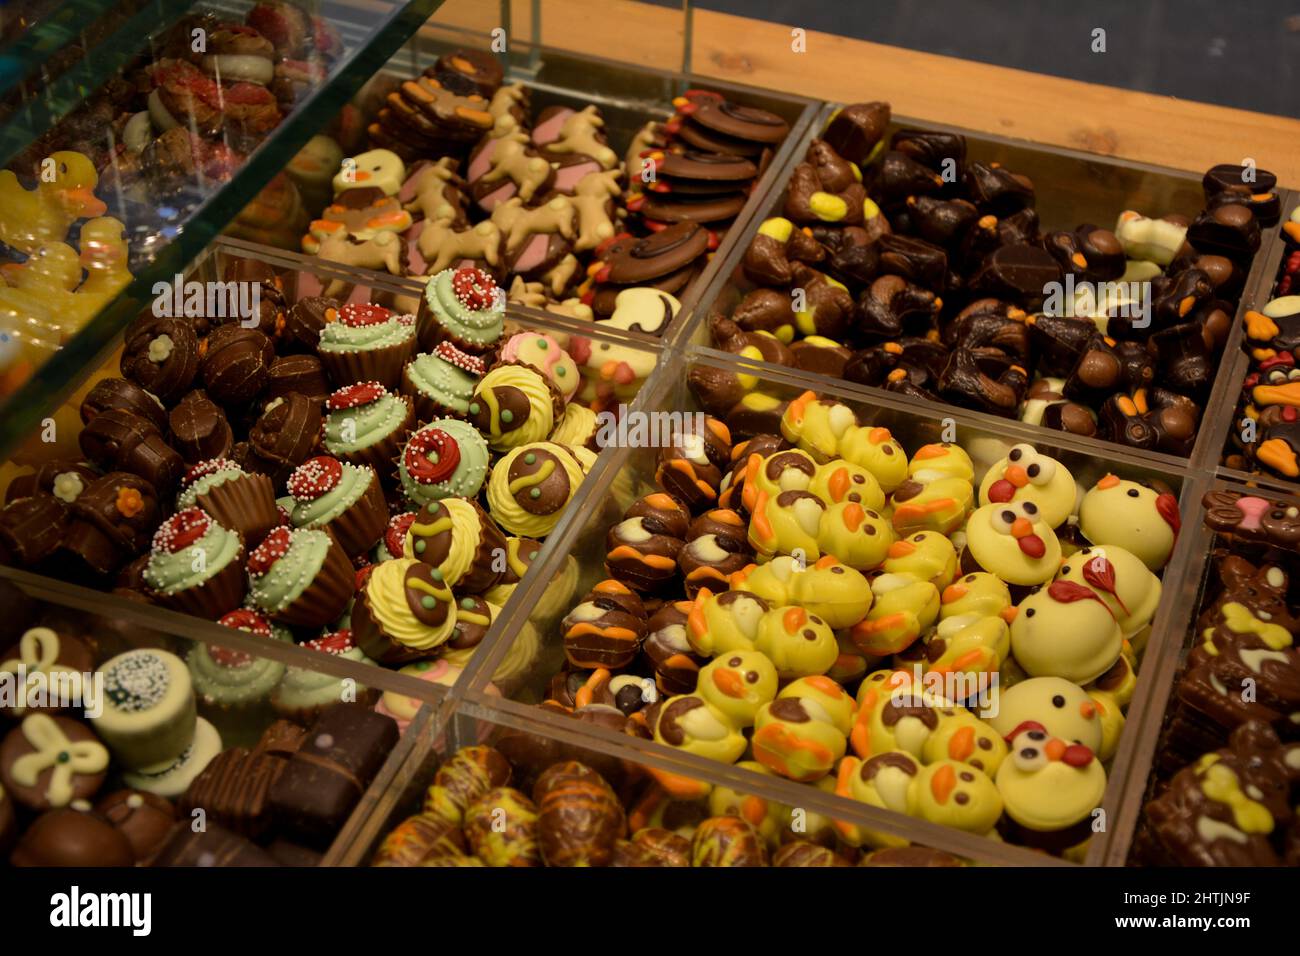 chocolate candy and duck-shape cookies in a market Stock Photo